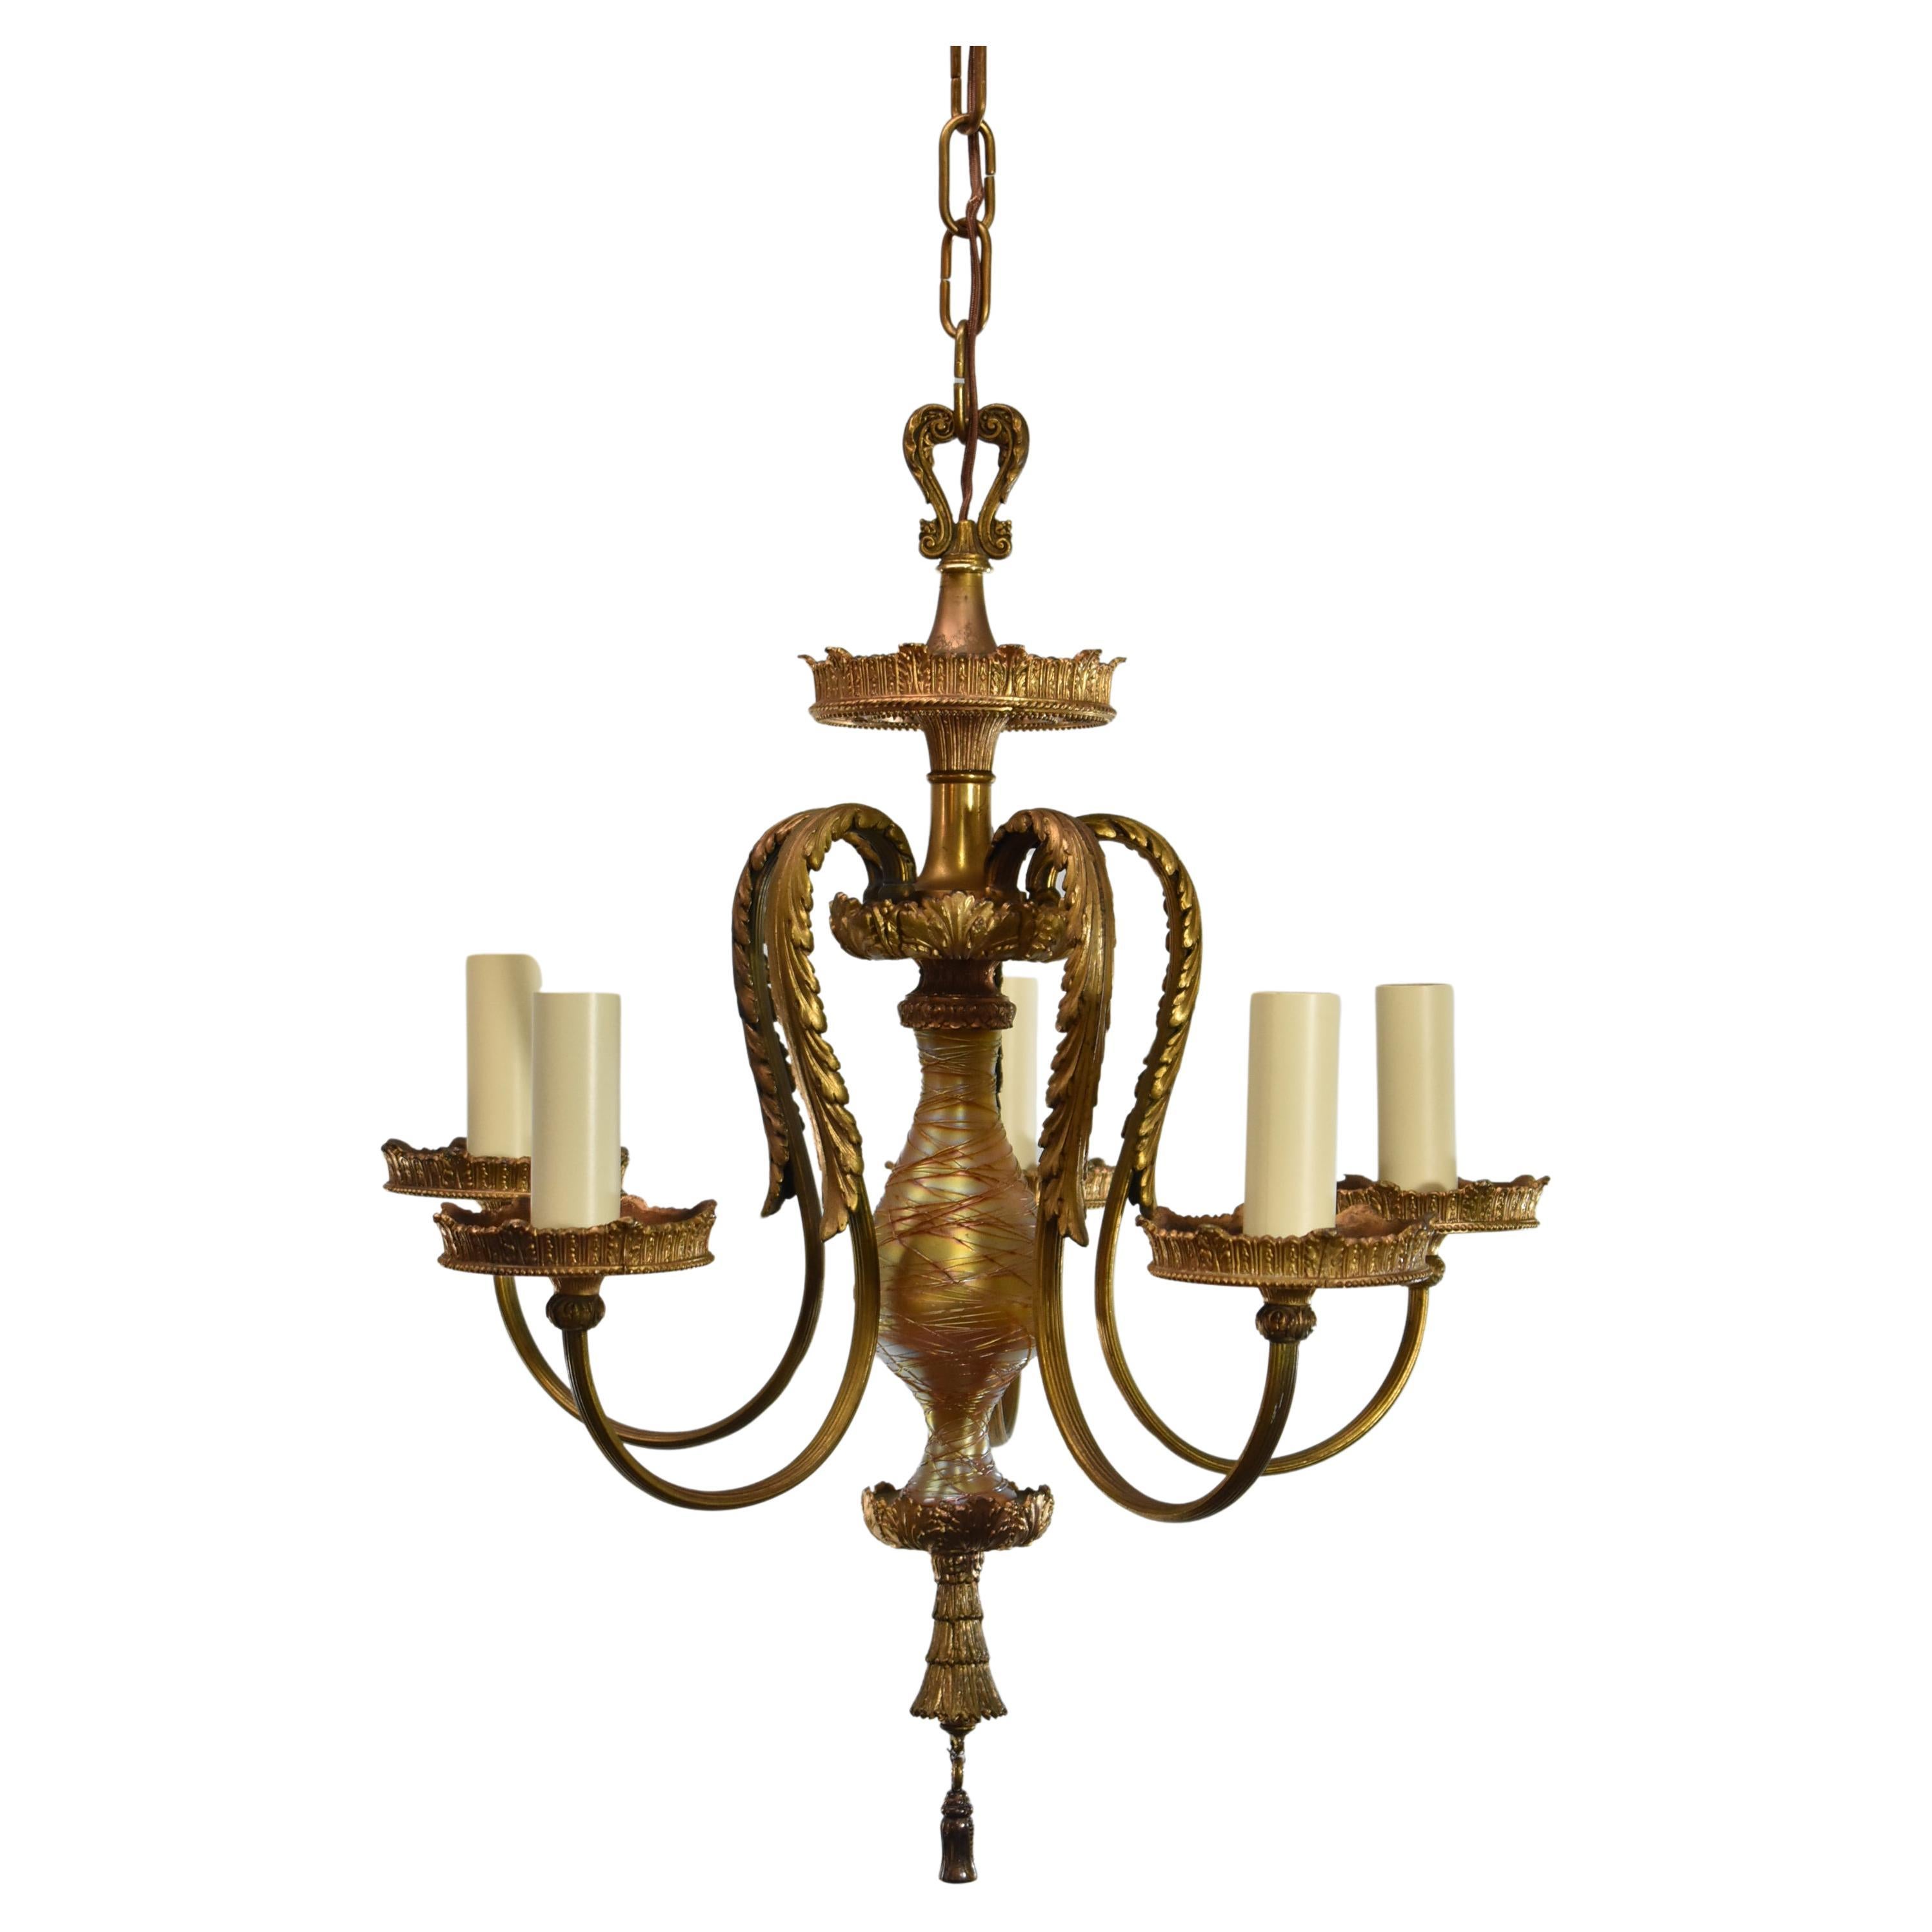 Durand Art Glass Five-Arm Chandelier with Gold Dore For Sale